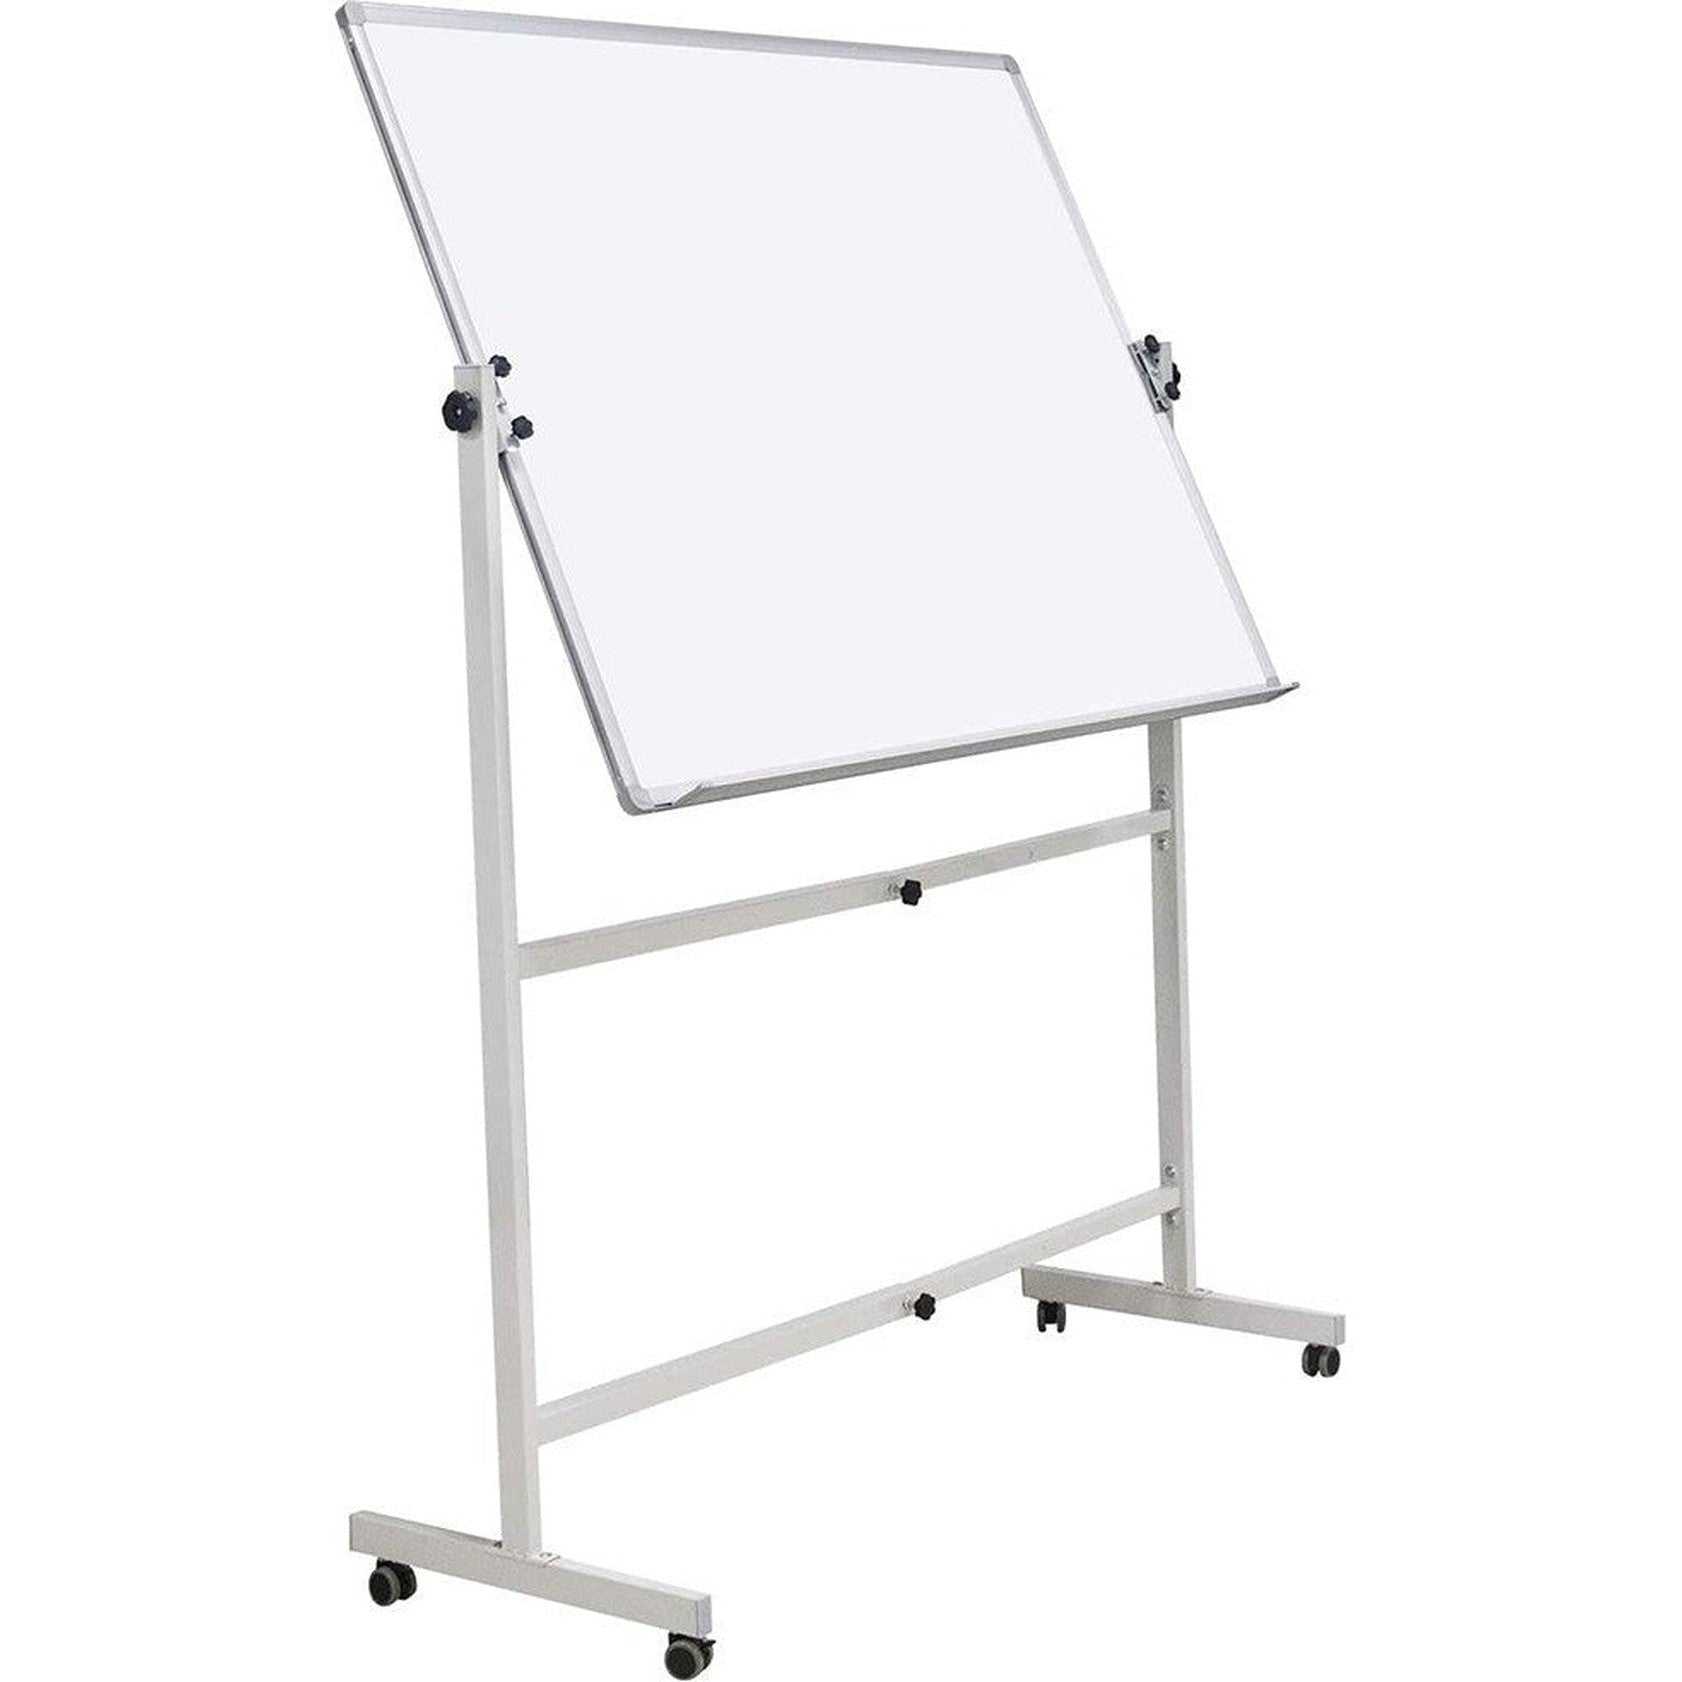 70Cm X 100Cm Whiteboard With Stand-Stationery Cork Boards-Other-Star Light Kuwait